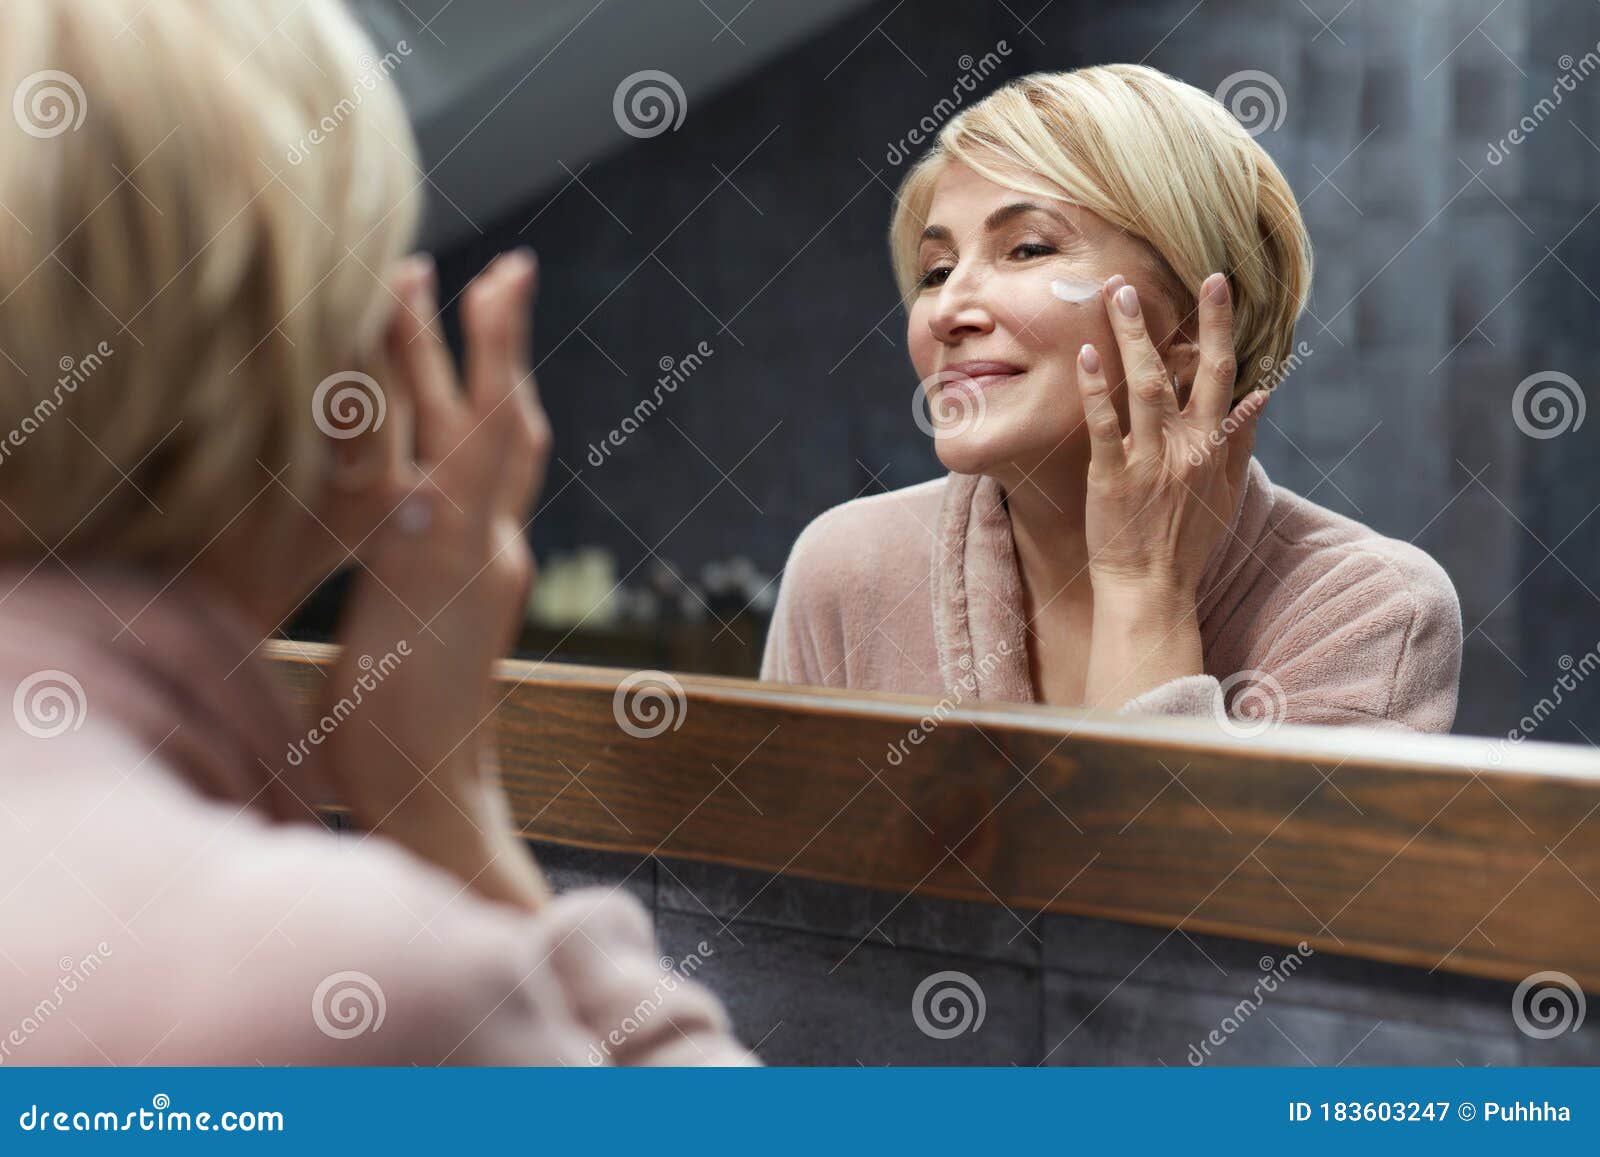 skincare routine. mature woman uses cosmetic cream on face skin in front of the mirror reflection.